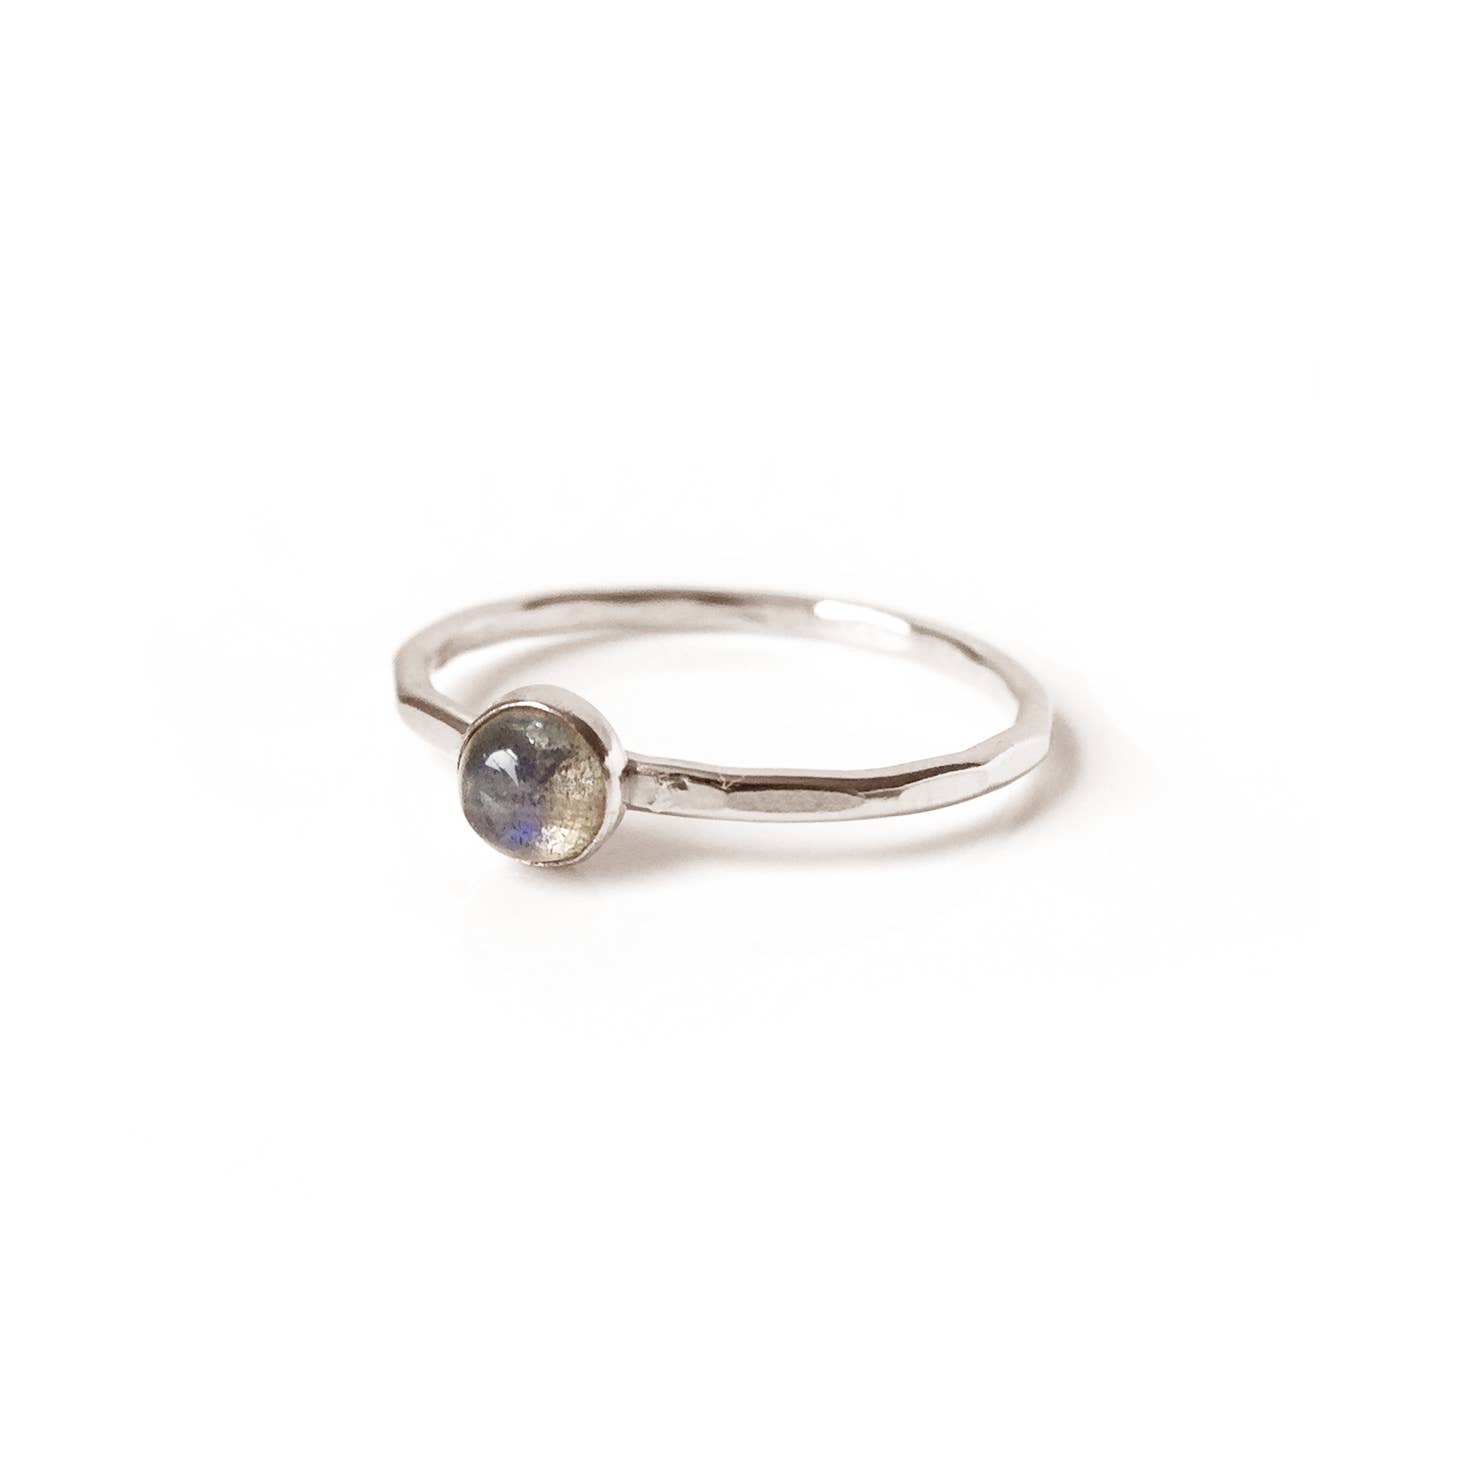 Sterling silver and labradorite stone ring handmade by Goldeluxe